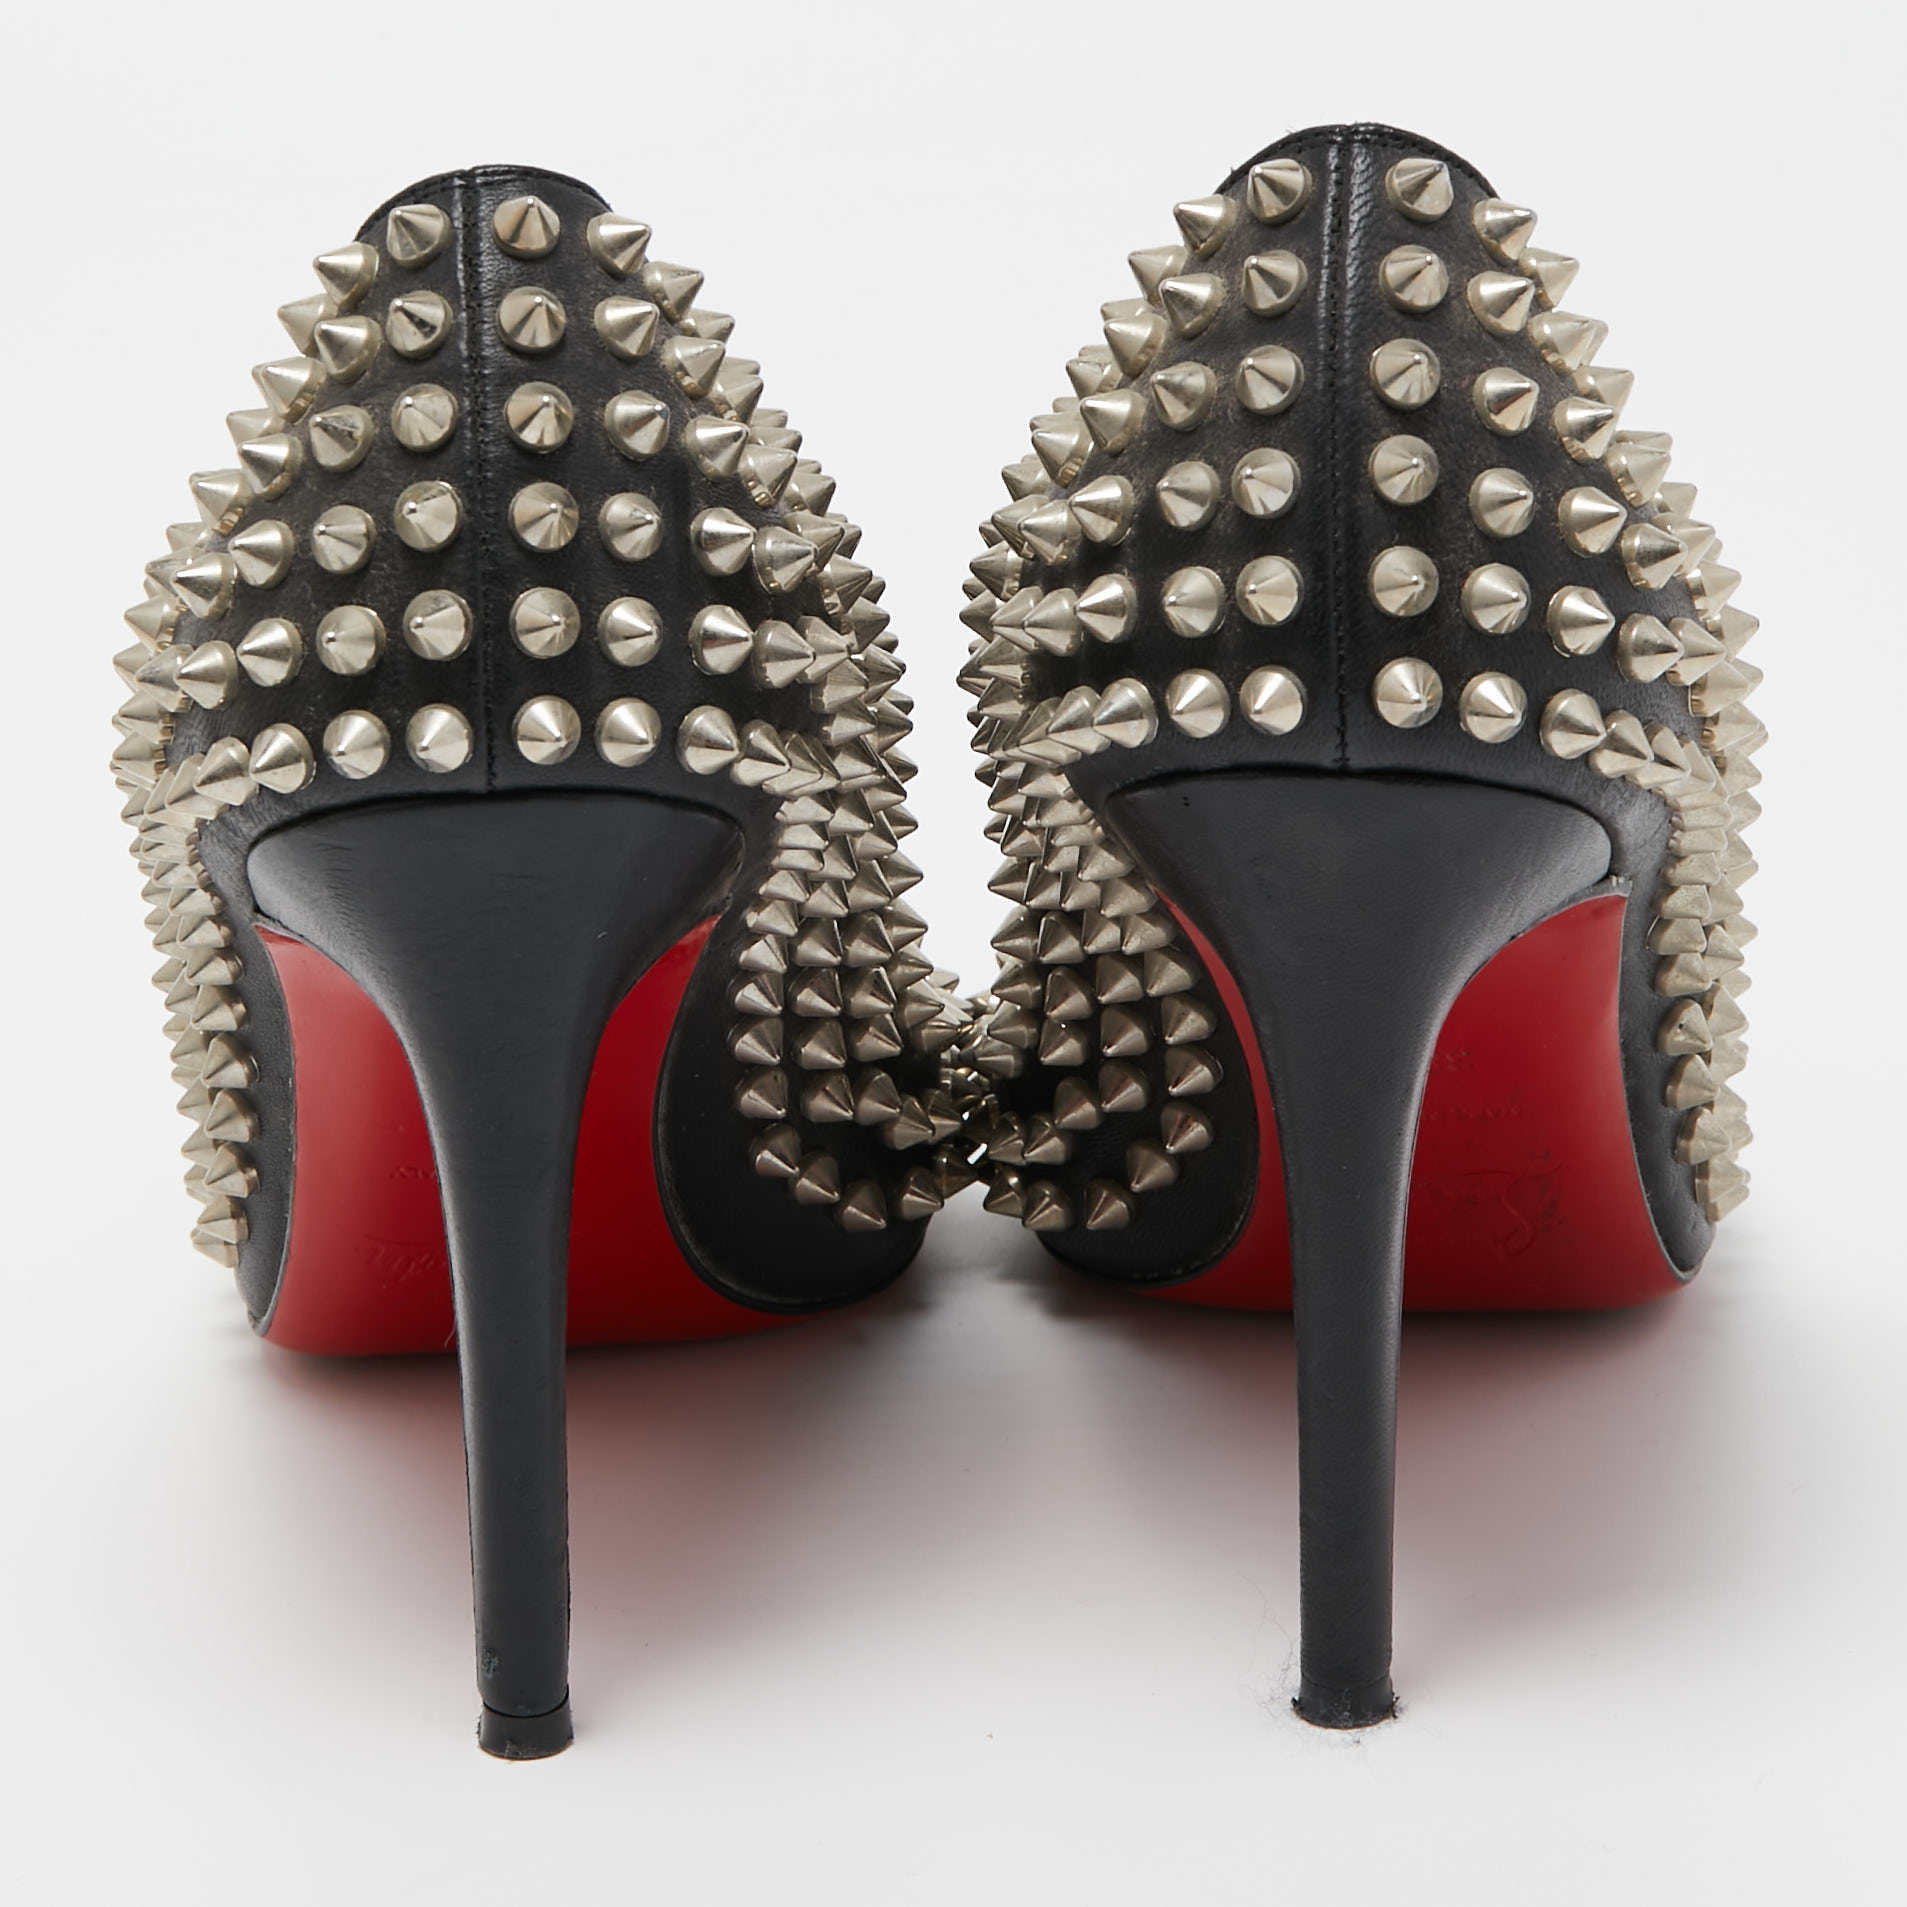 Christian Louboutin Black Leather Pigalle Spikes Pointed Toe Pumps Size 38.5